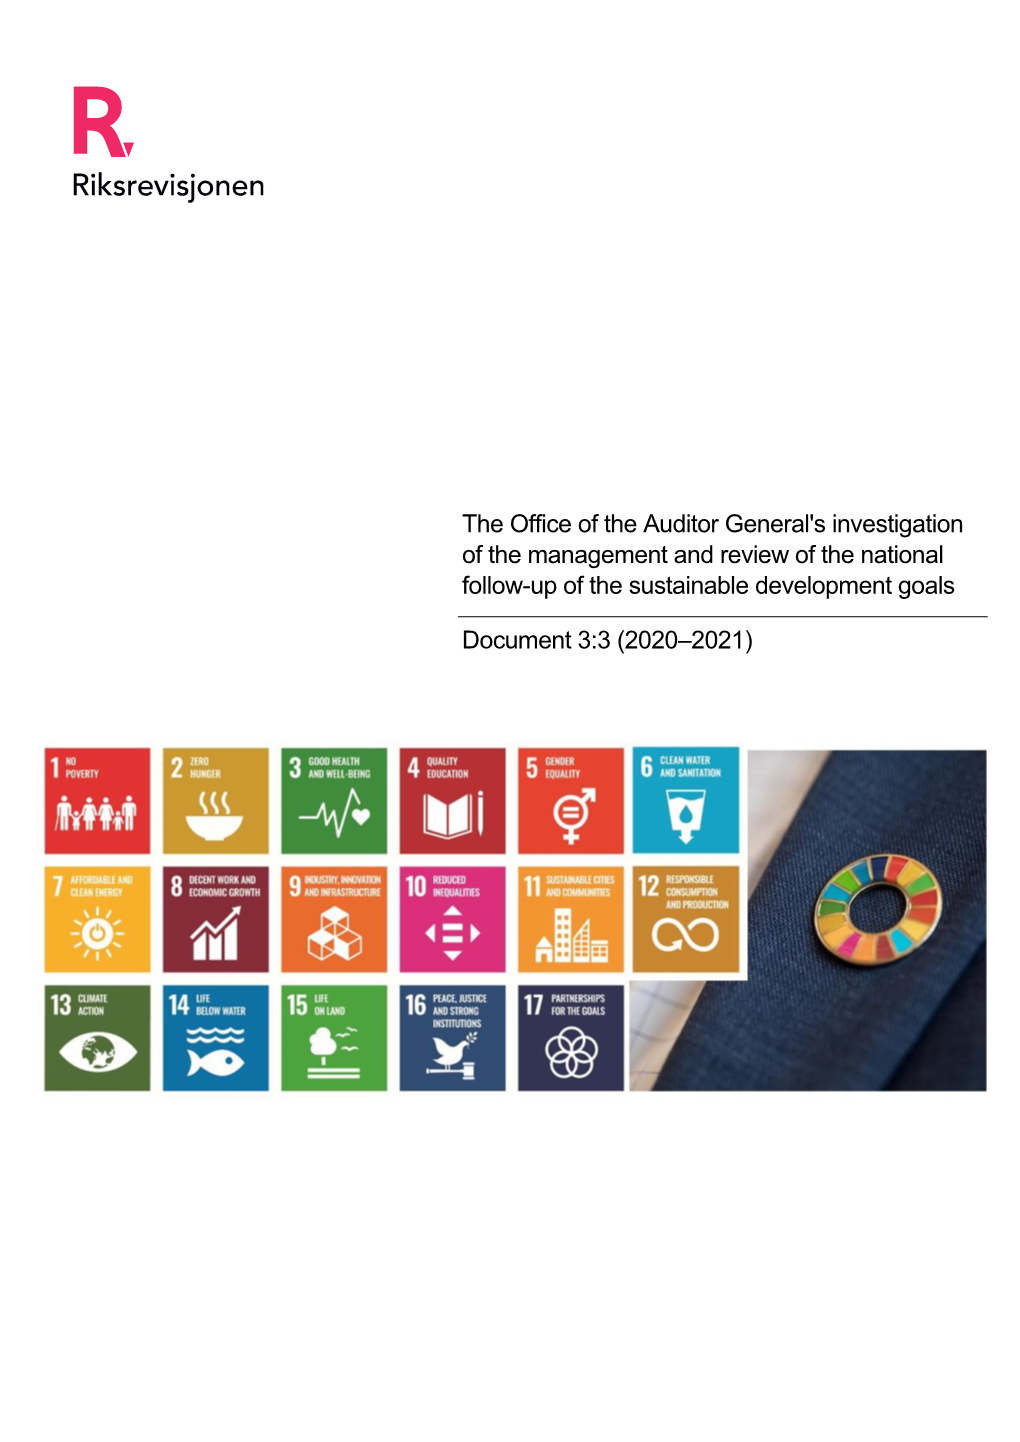 The Office of the Auditor General's Investigation of the Management and Review of the National Follow-Up of the Sustainable Development Goals